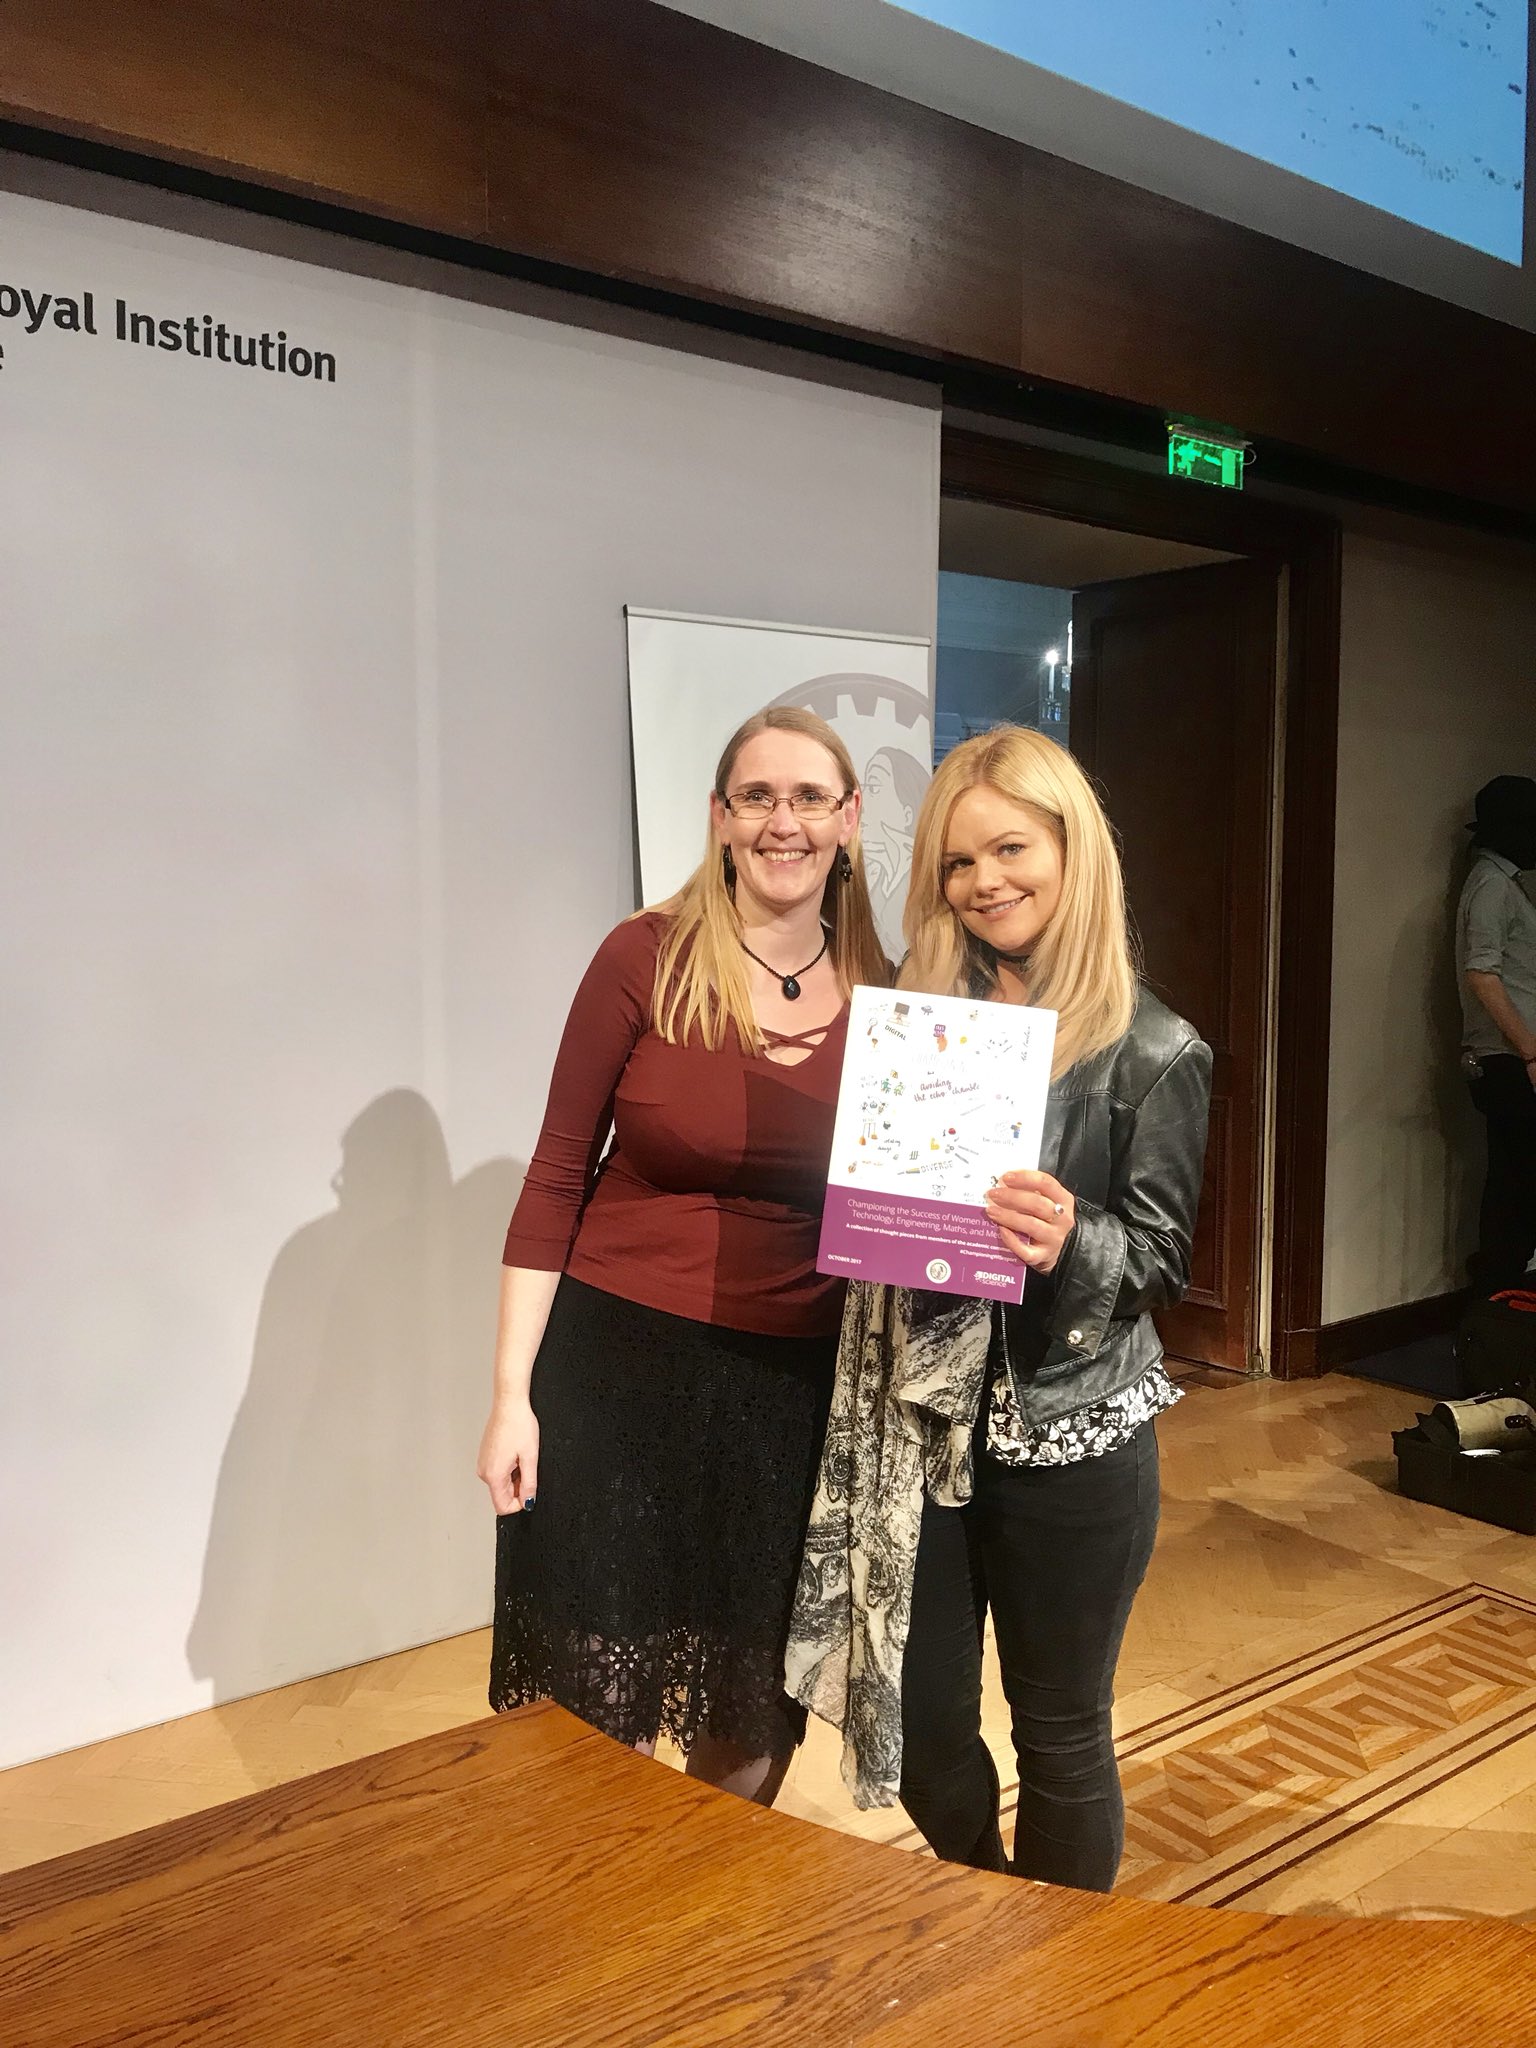 It’s @suw and @laurawheelers holding a copy of the #ChampioningWISreport at the @royalinstitute ready for #ALD17 #AdaLovelaceDay https://t.co/cjNDQ84hdR